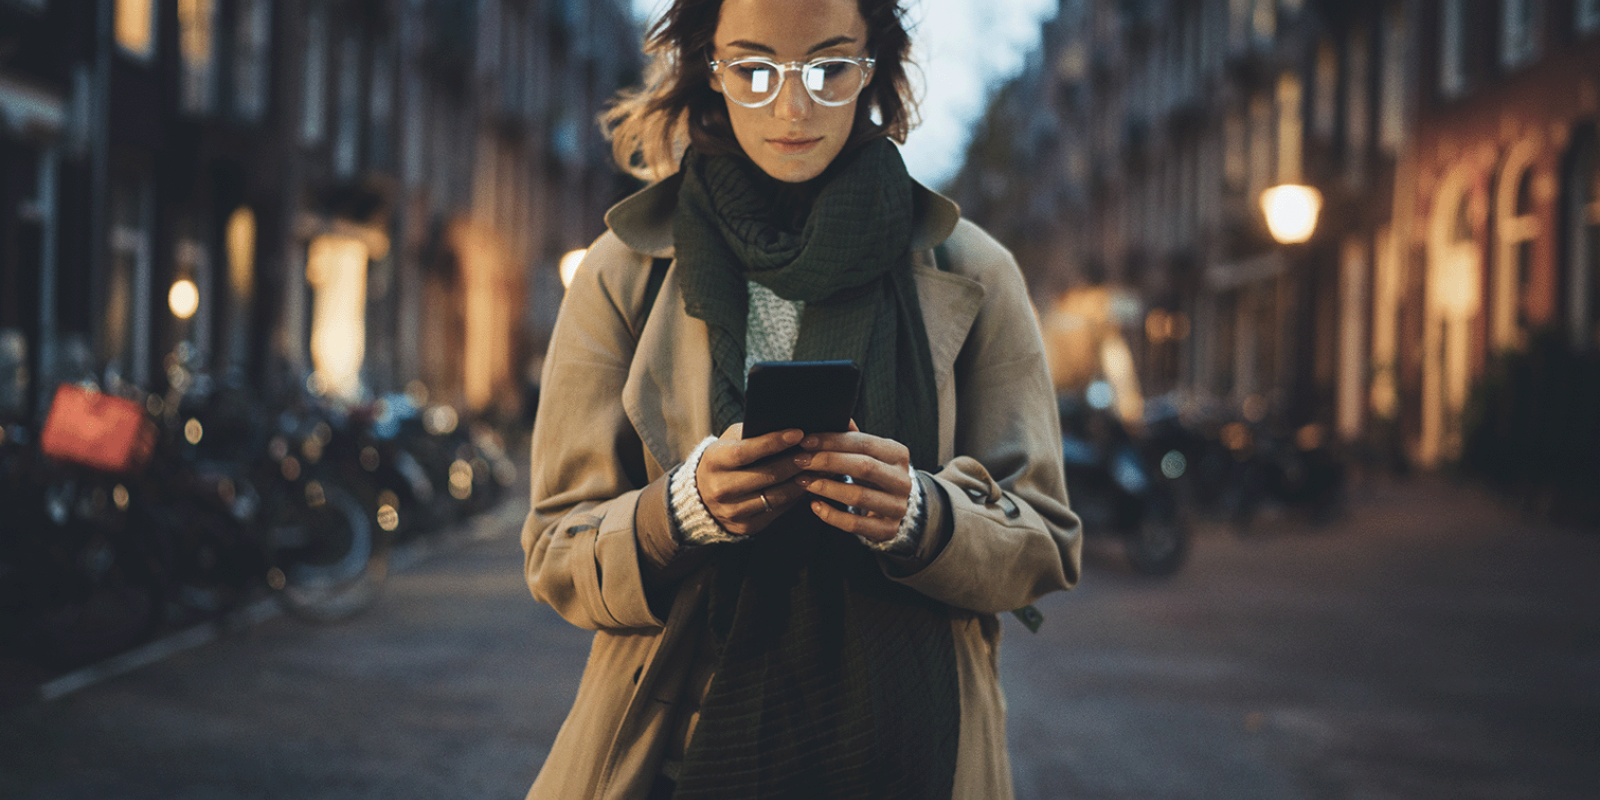 woman looking at phone in city at night